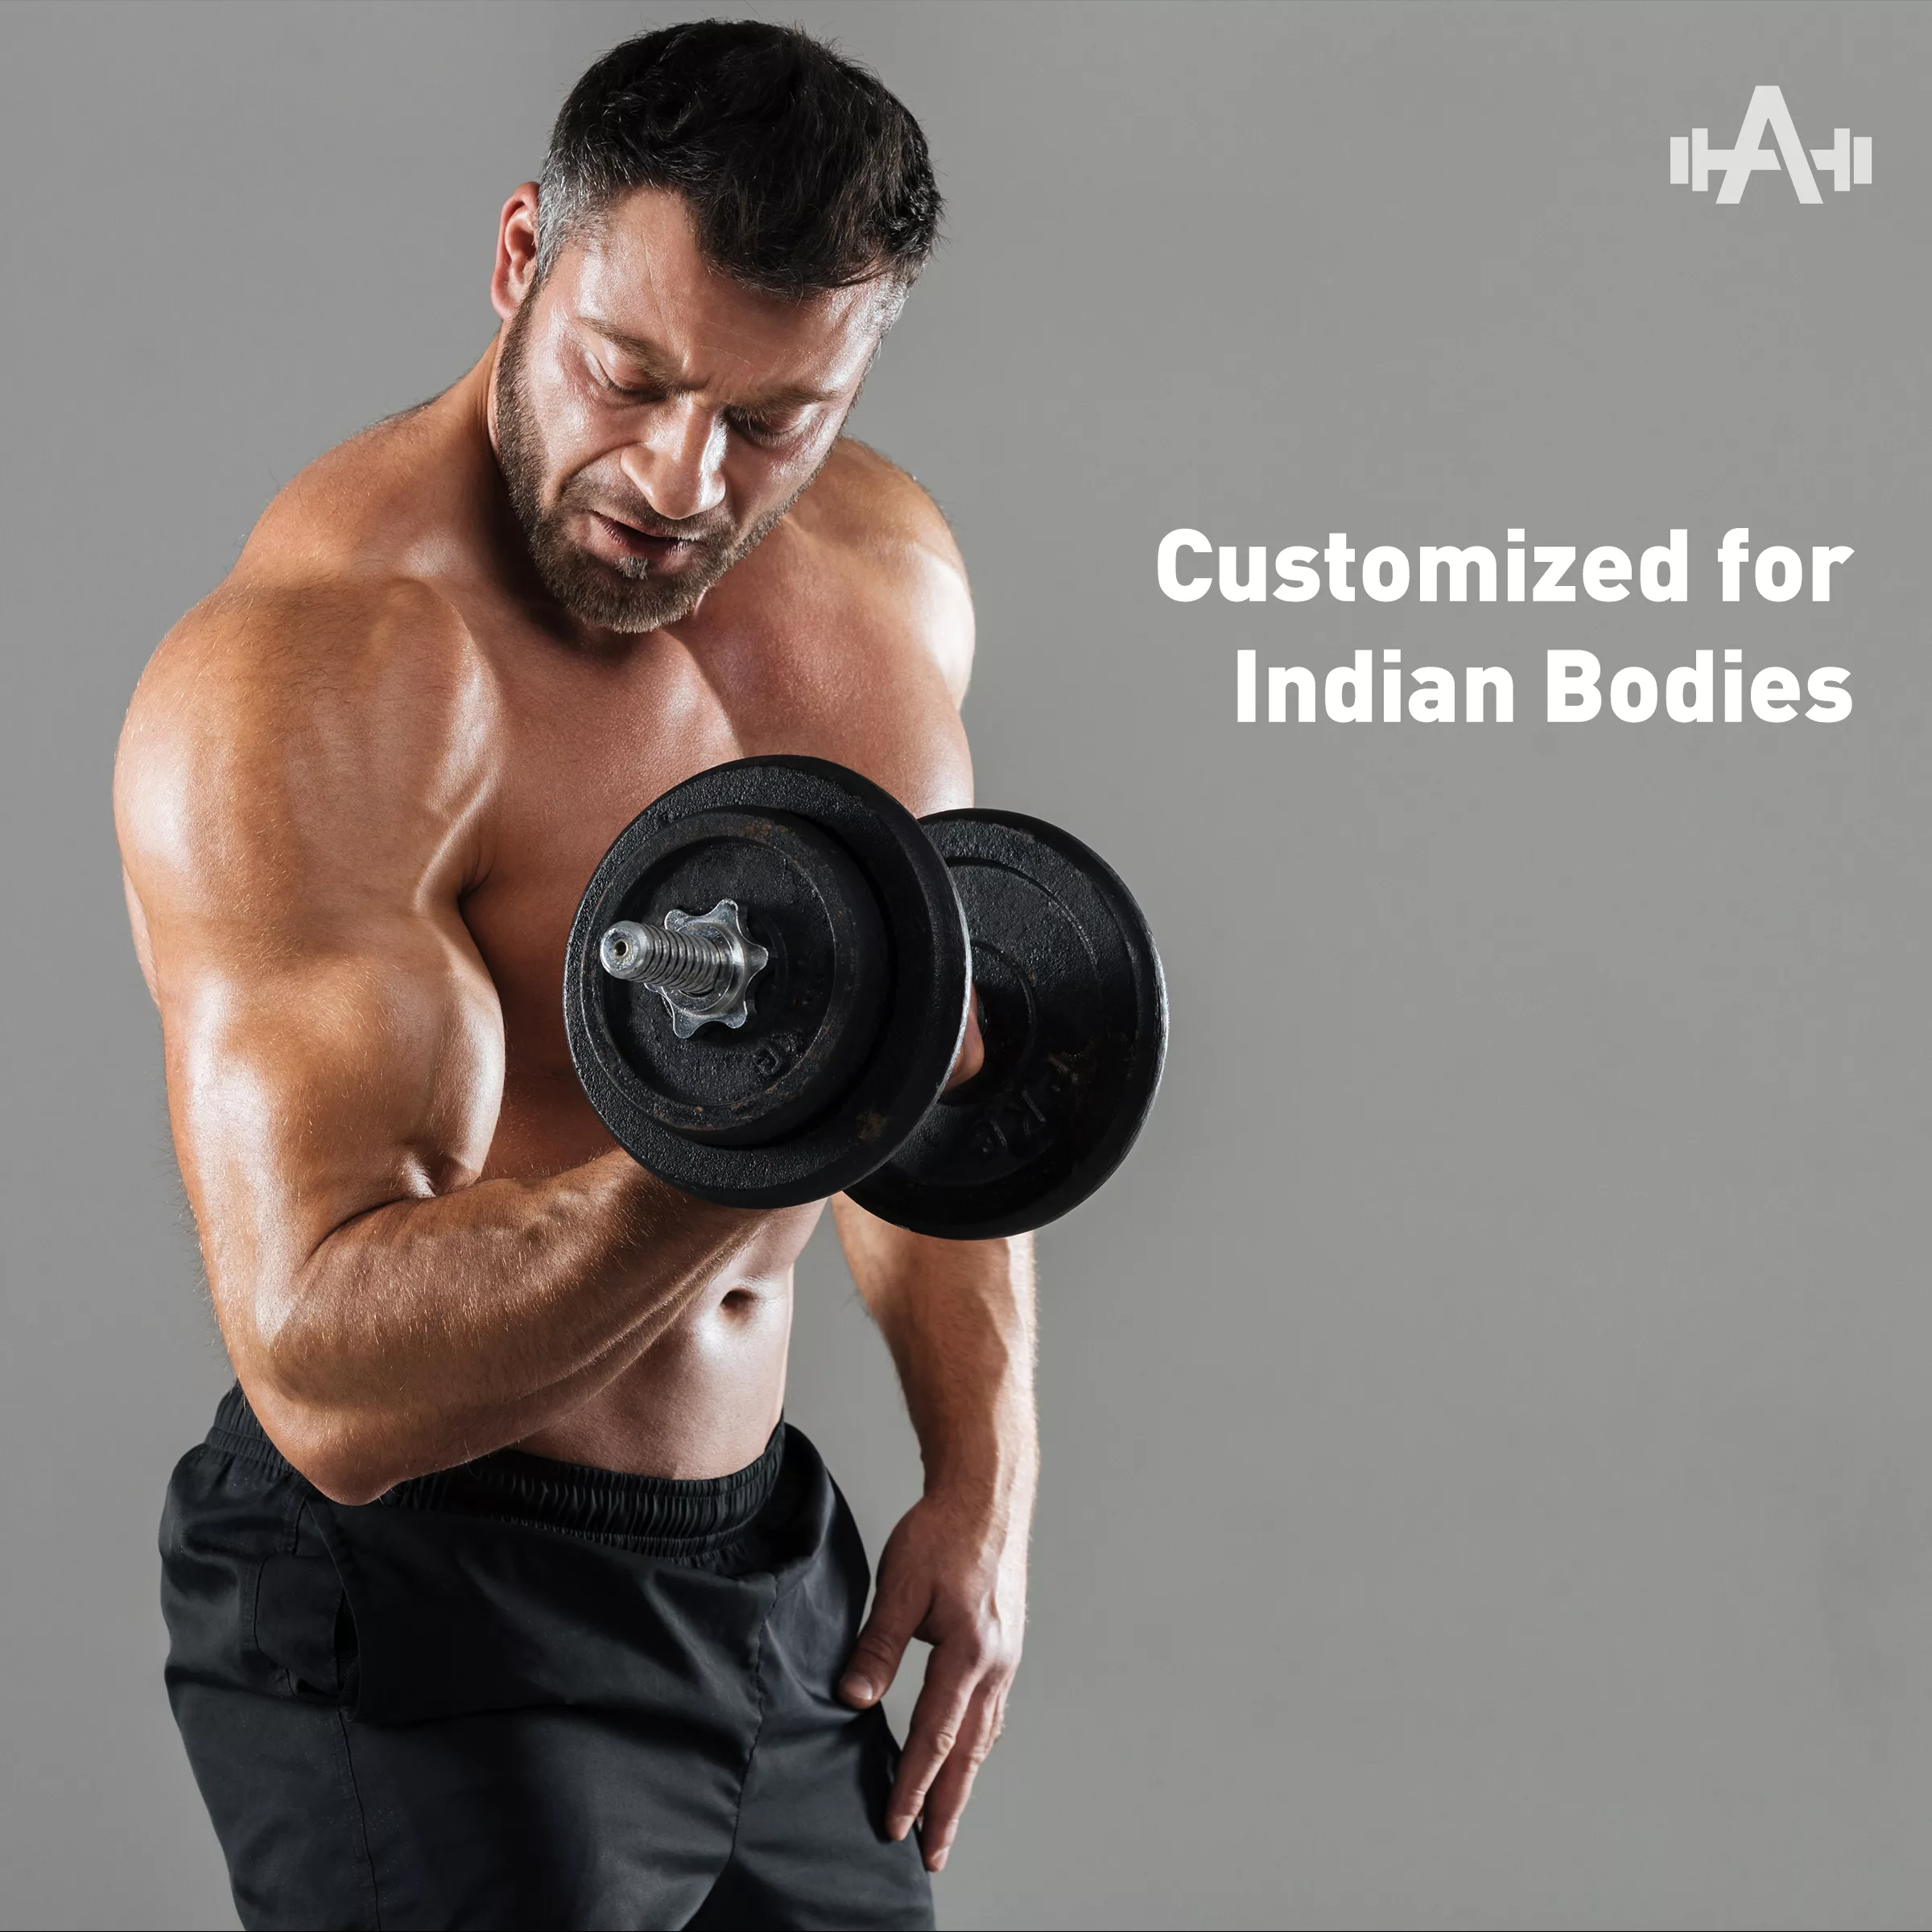 Customized for Indian Bodies